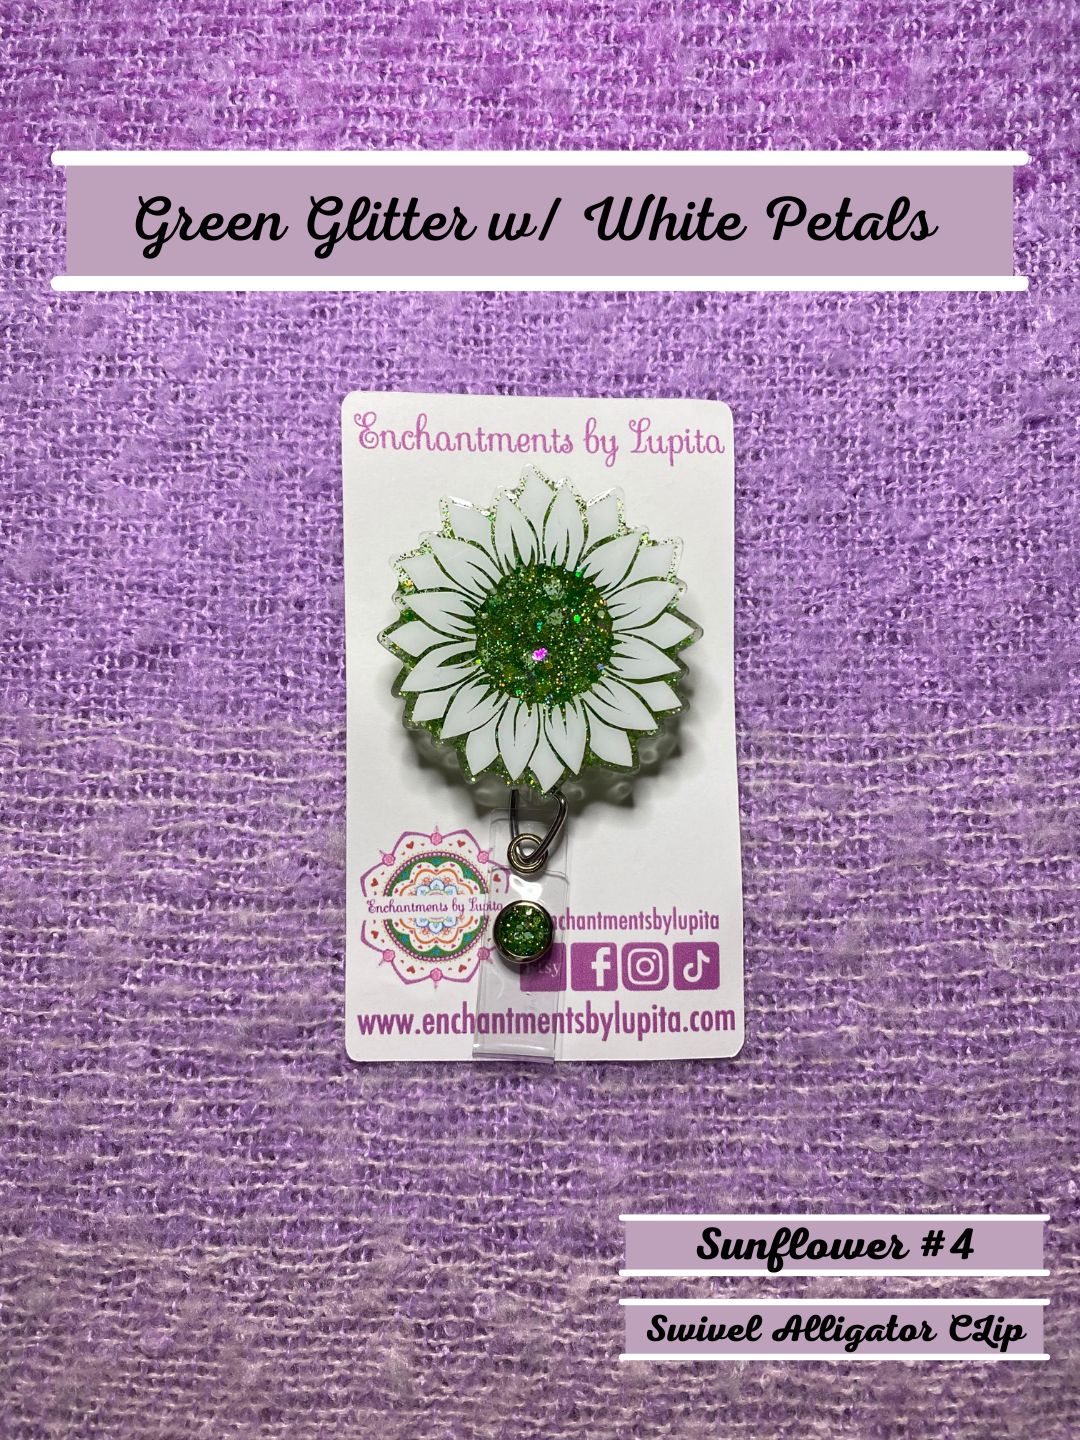 Sunflower Badge Reel - Enchantments by Lupita